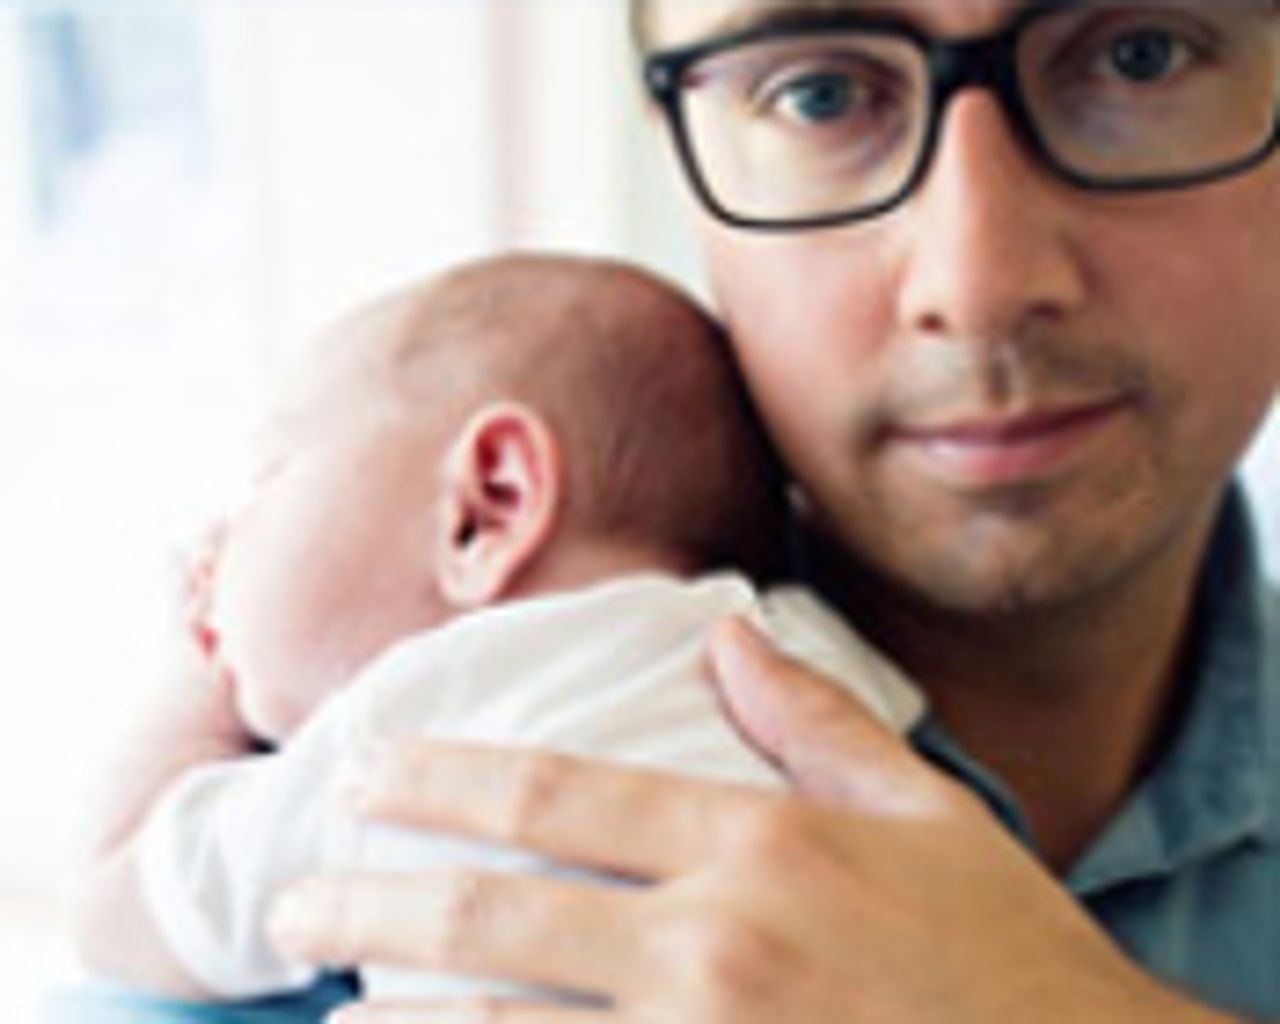 Stock image of a man and a baby